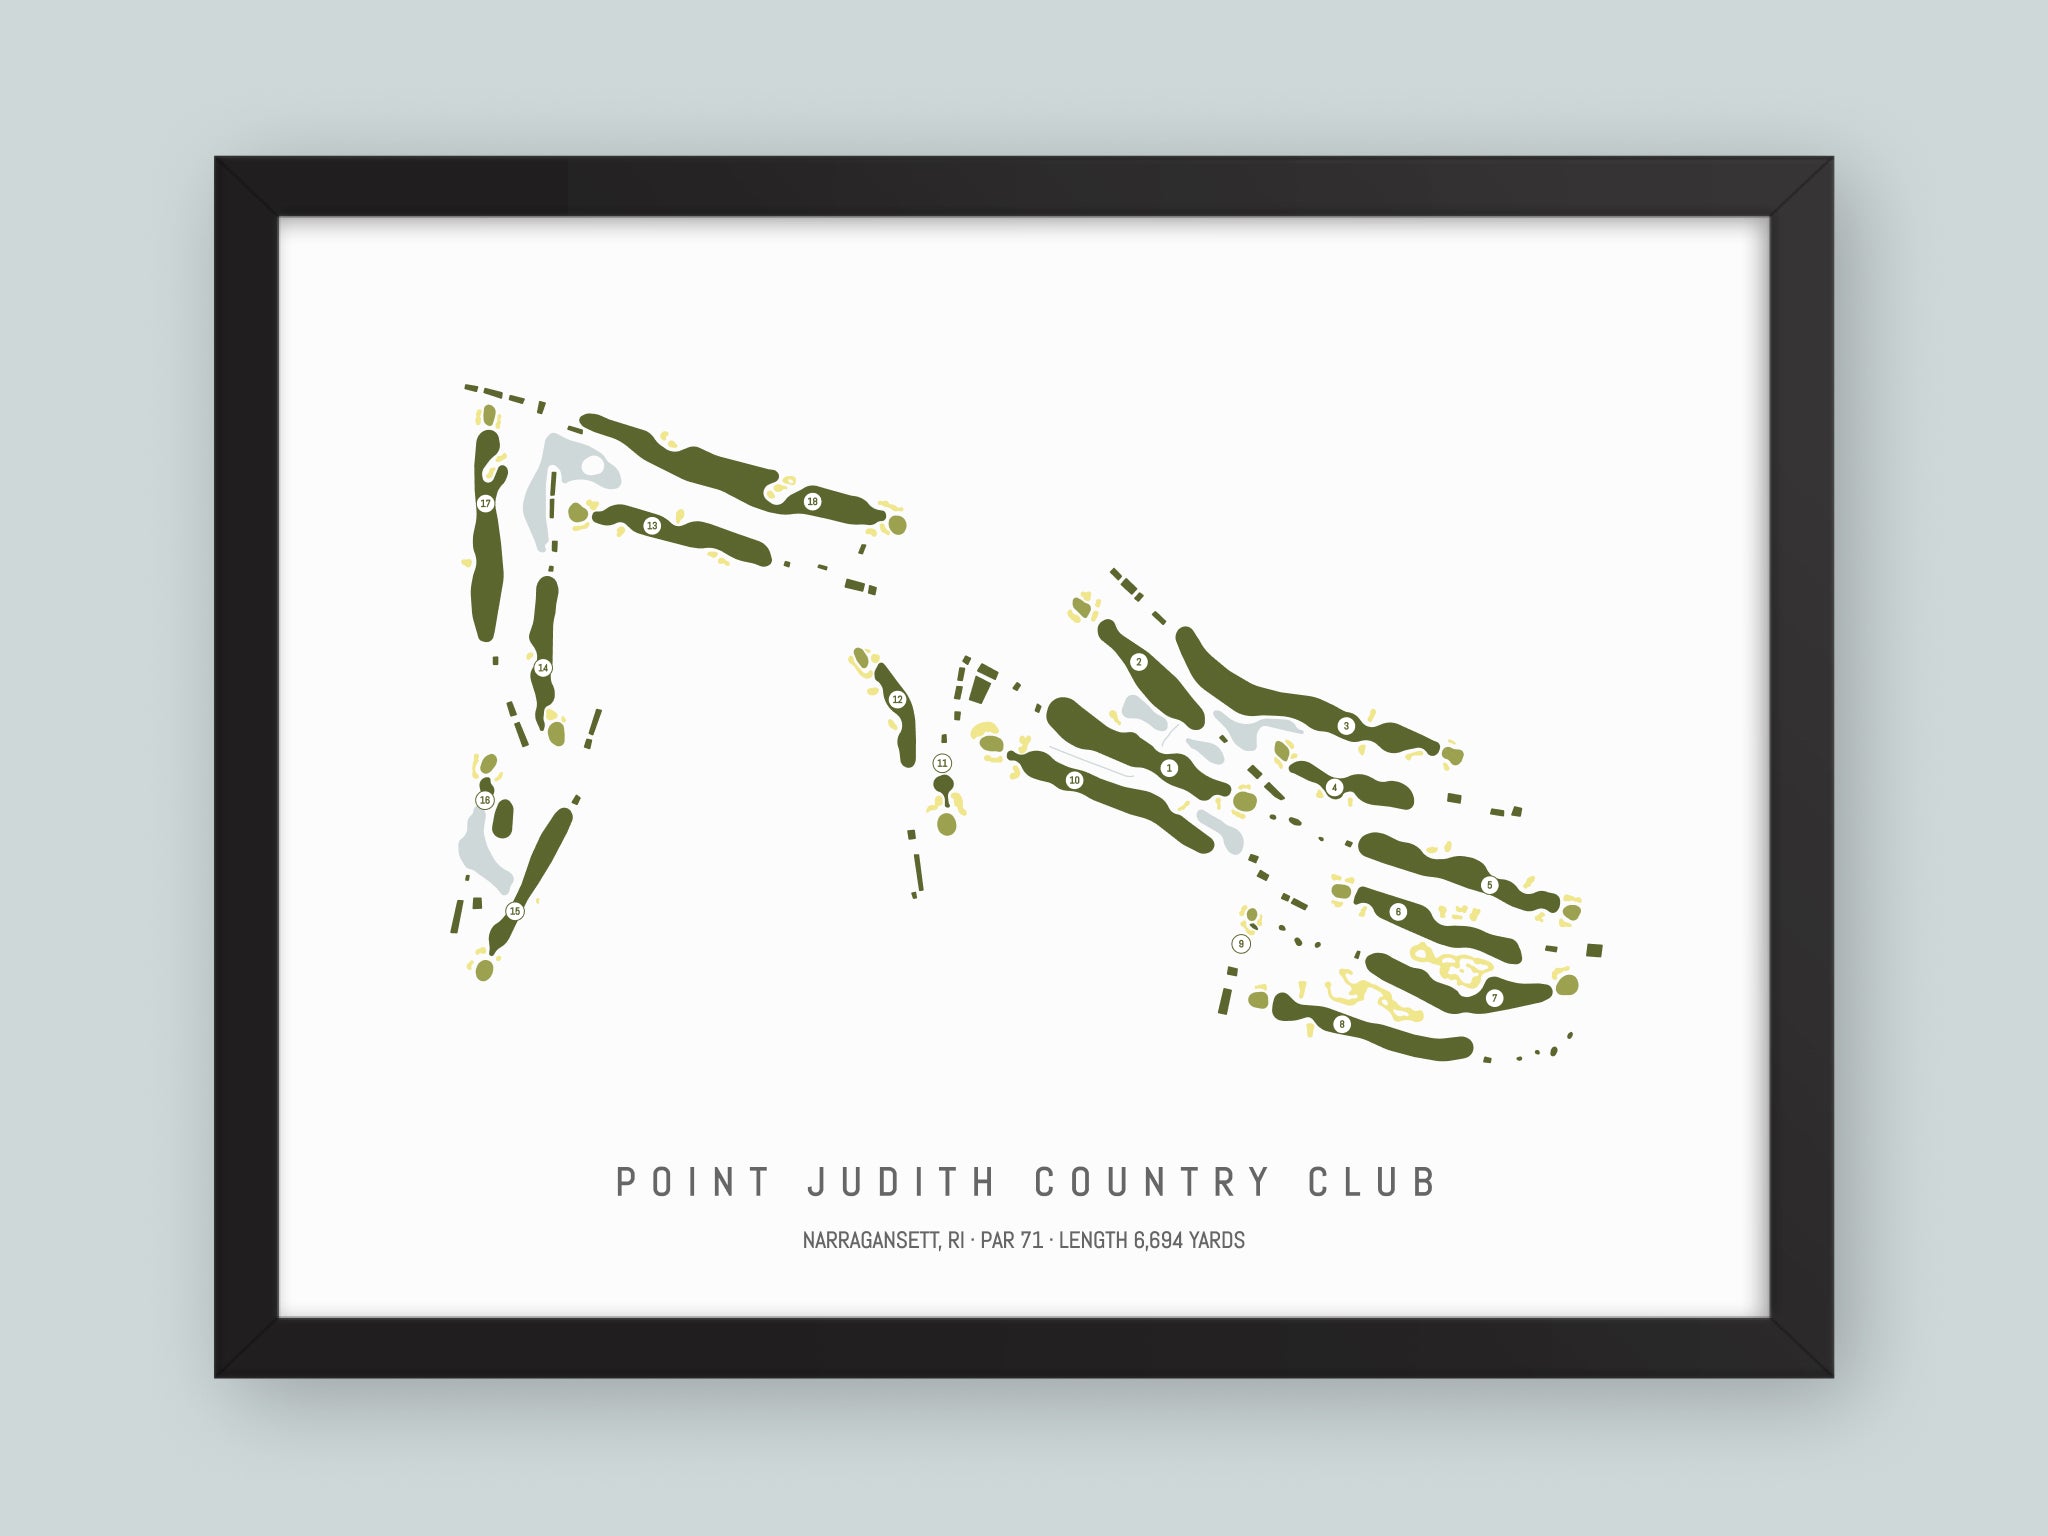 Point-Judith-Country-Club-RI--Black-Frame-24x18-With-Hole-Numbers